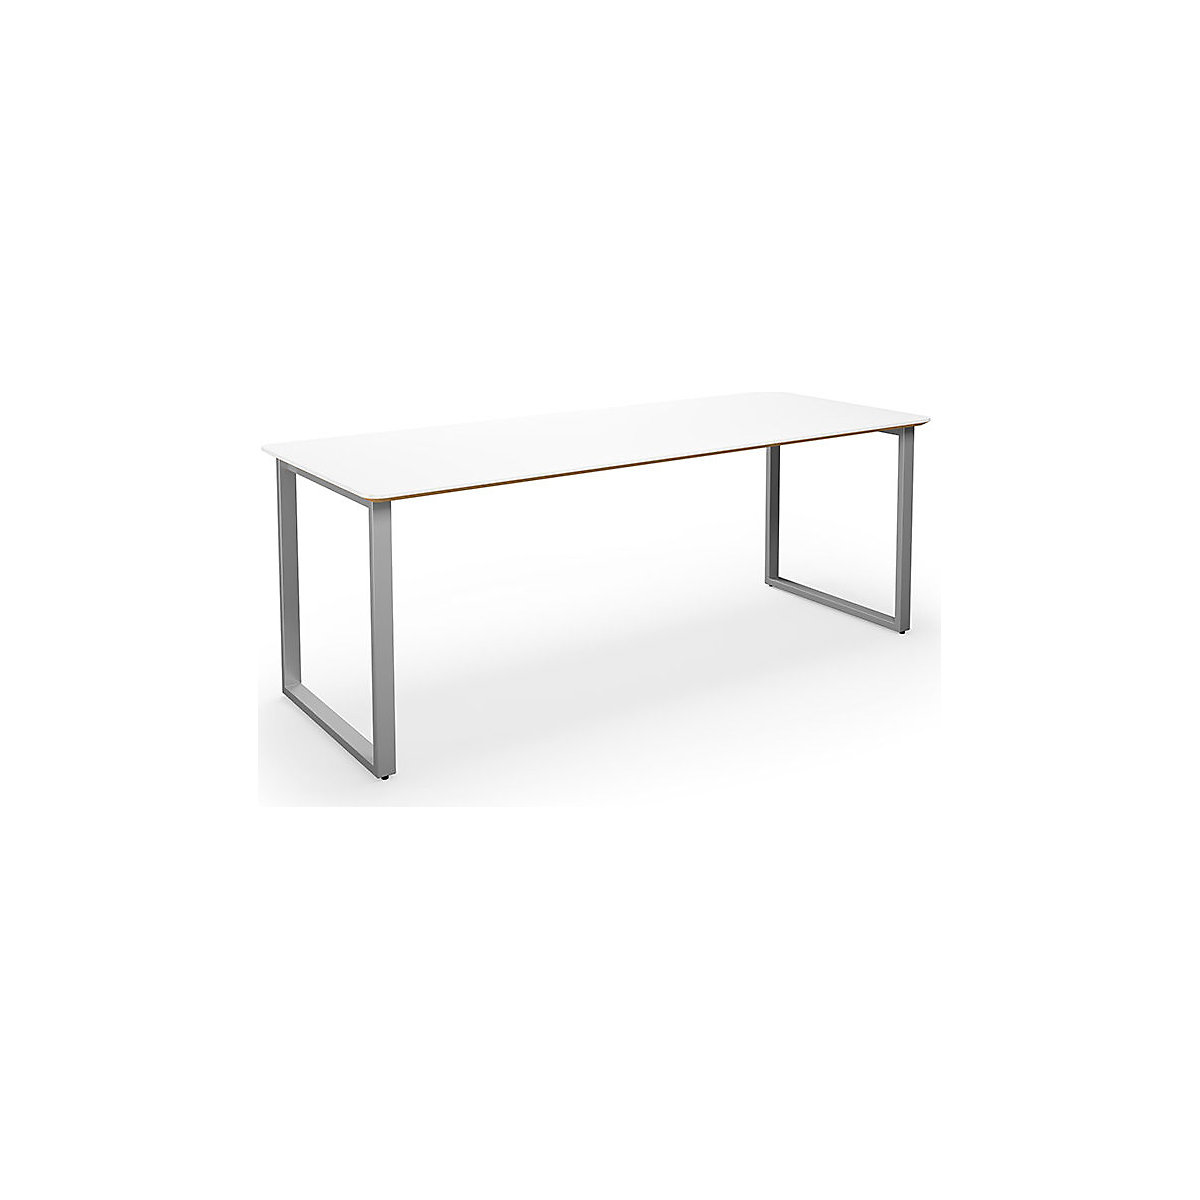 DUO-O Trend multi-purpose desk, straight tabletop, rounded corners, WxD 2000 x 800 mm, white, silver-2